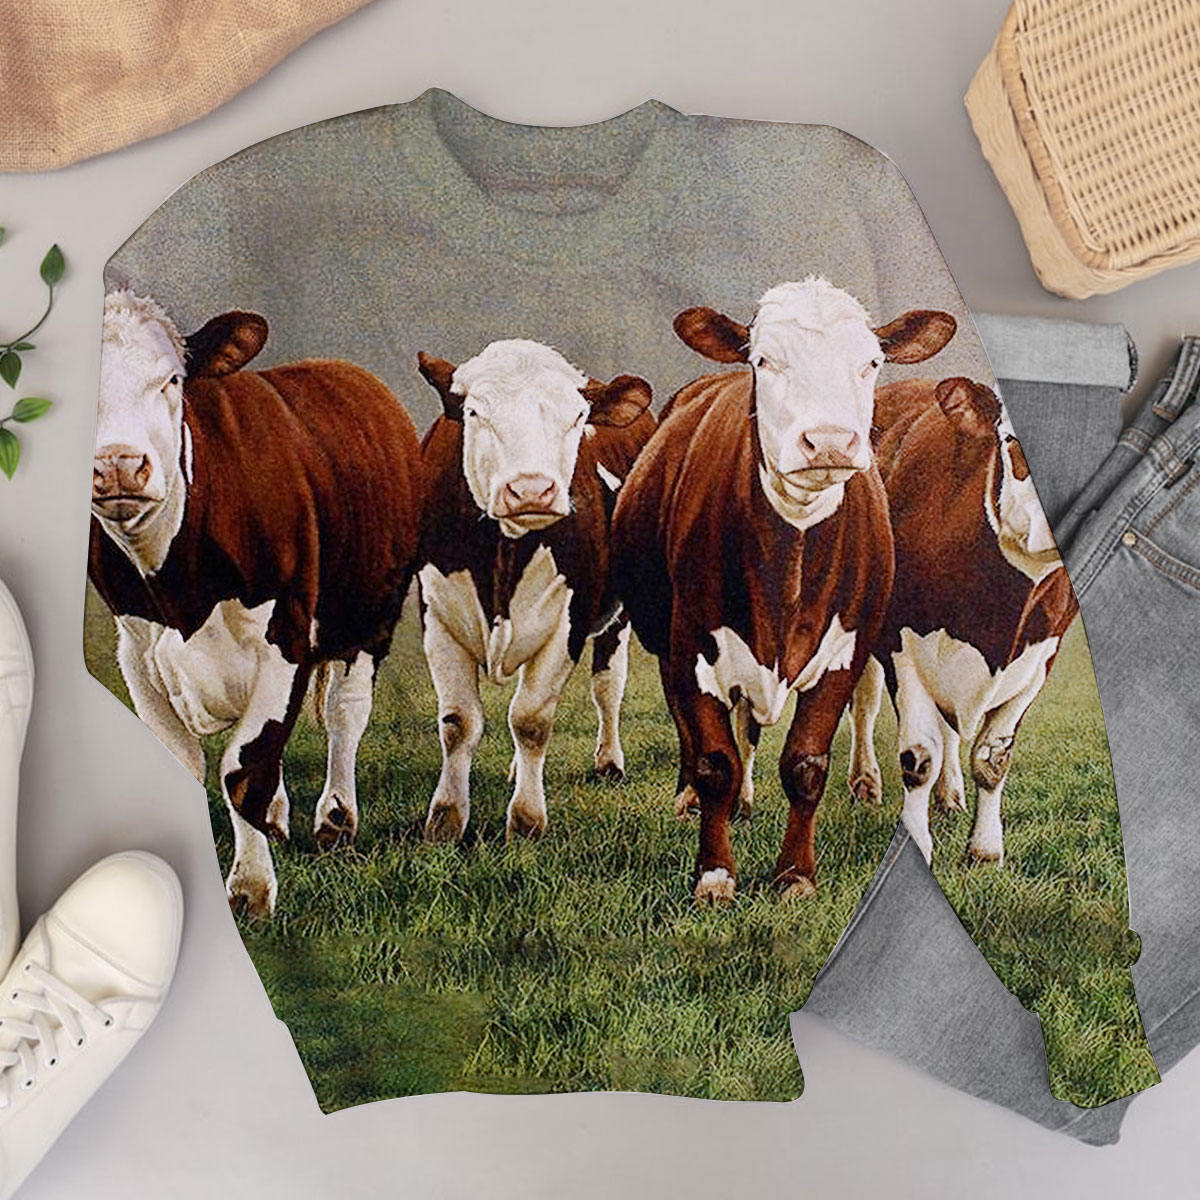 Four Cows Sweater